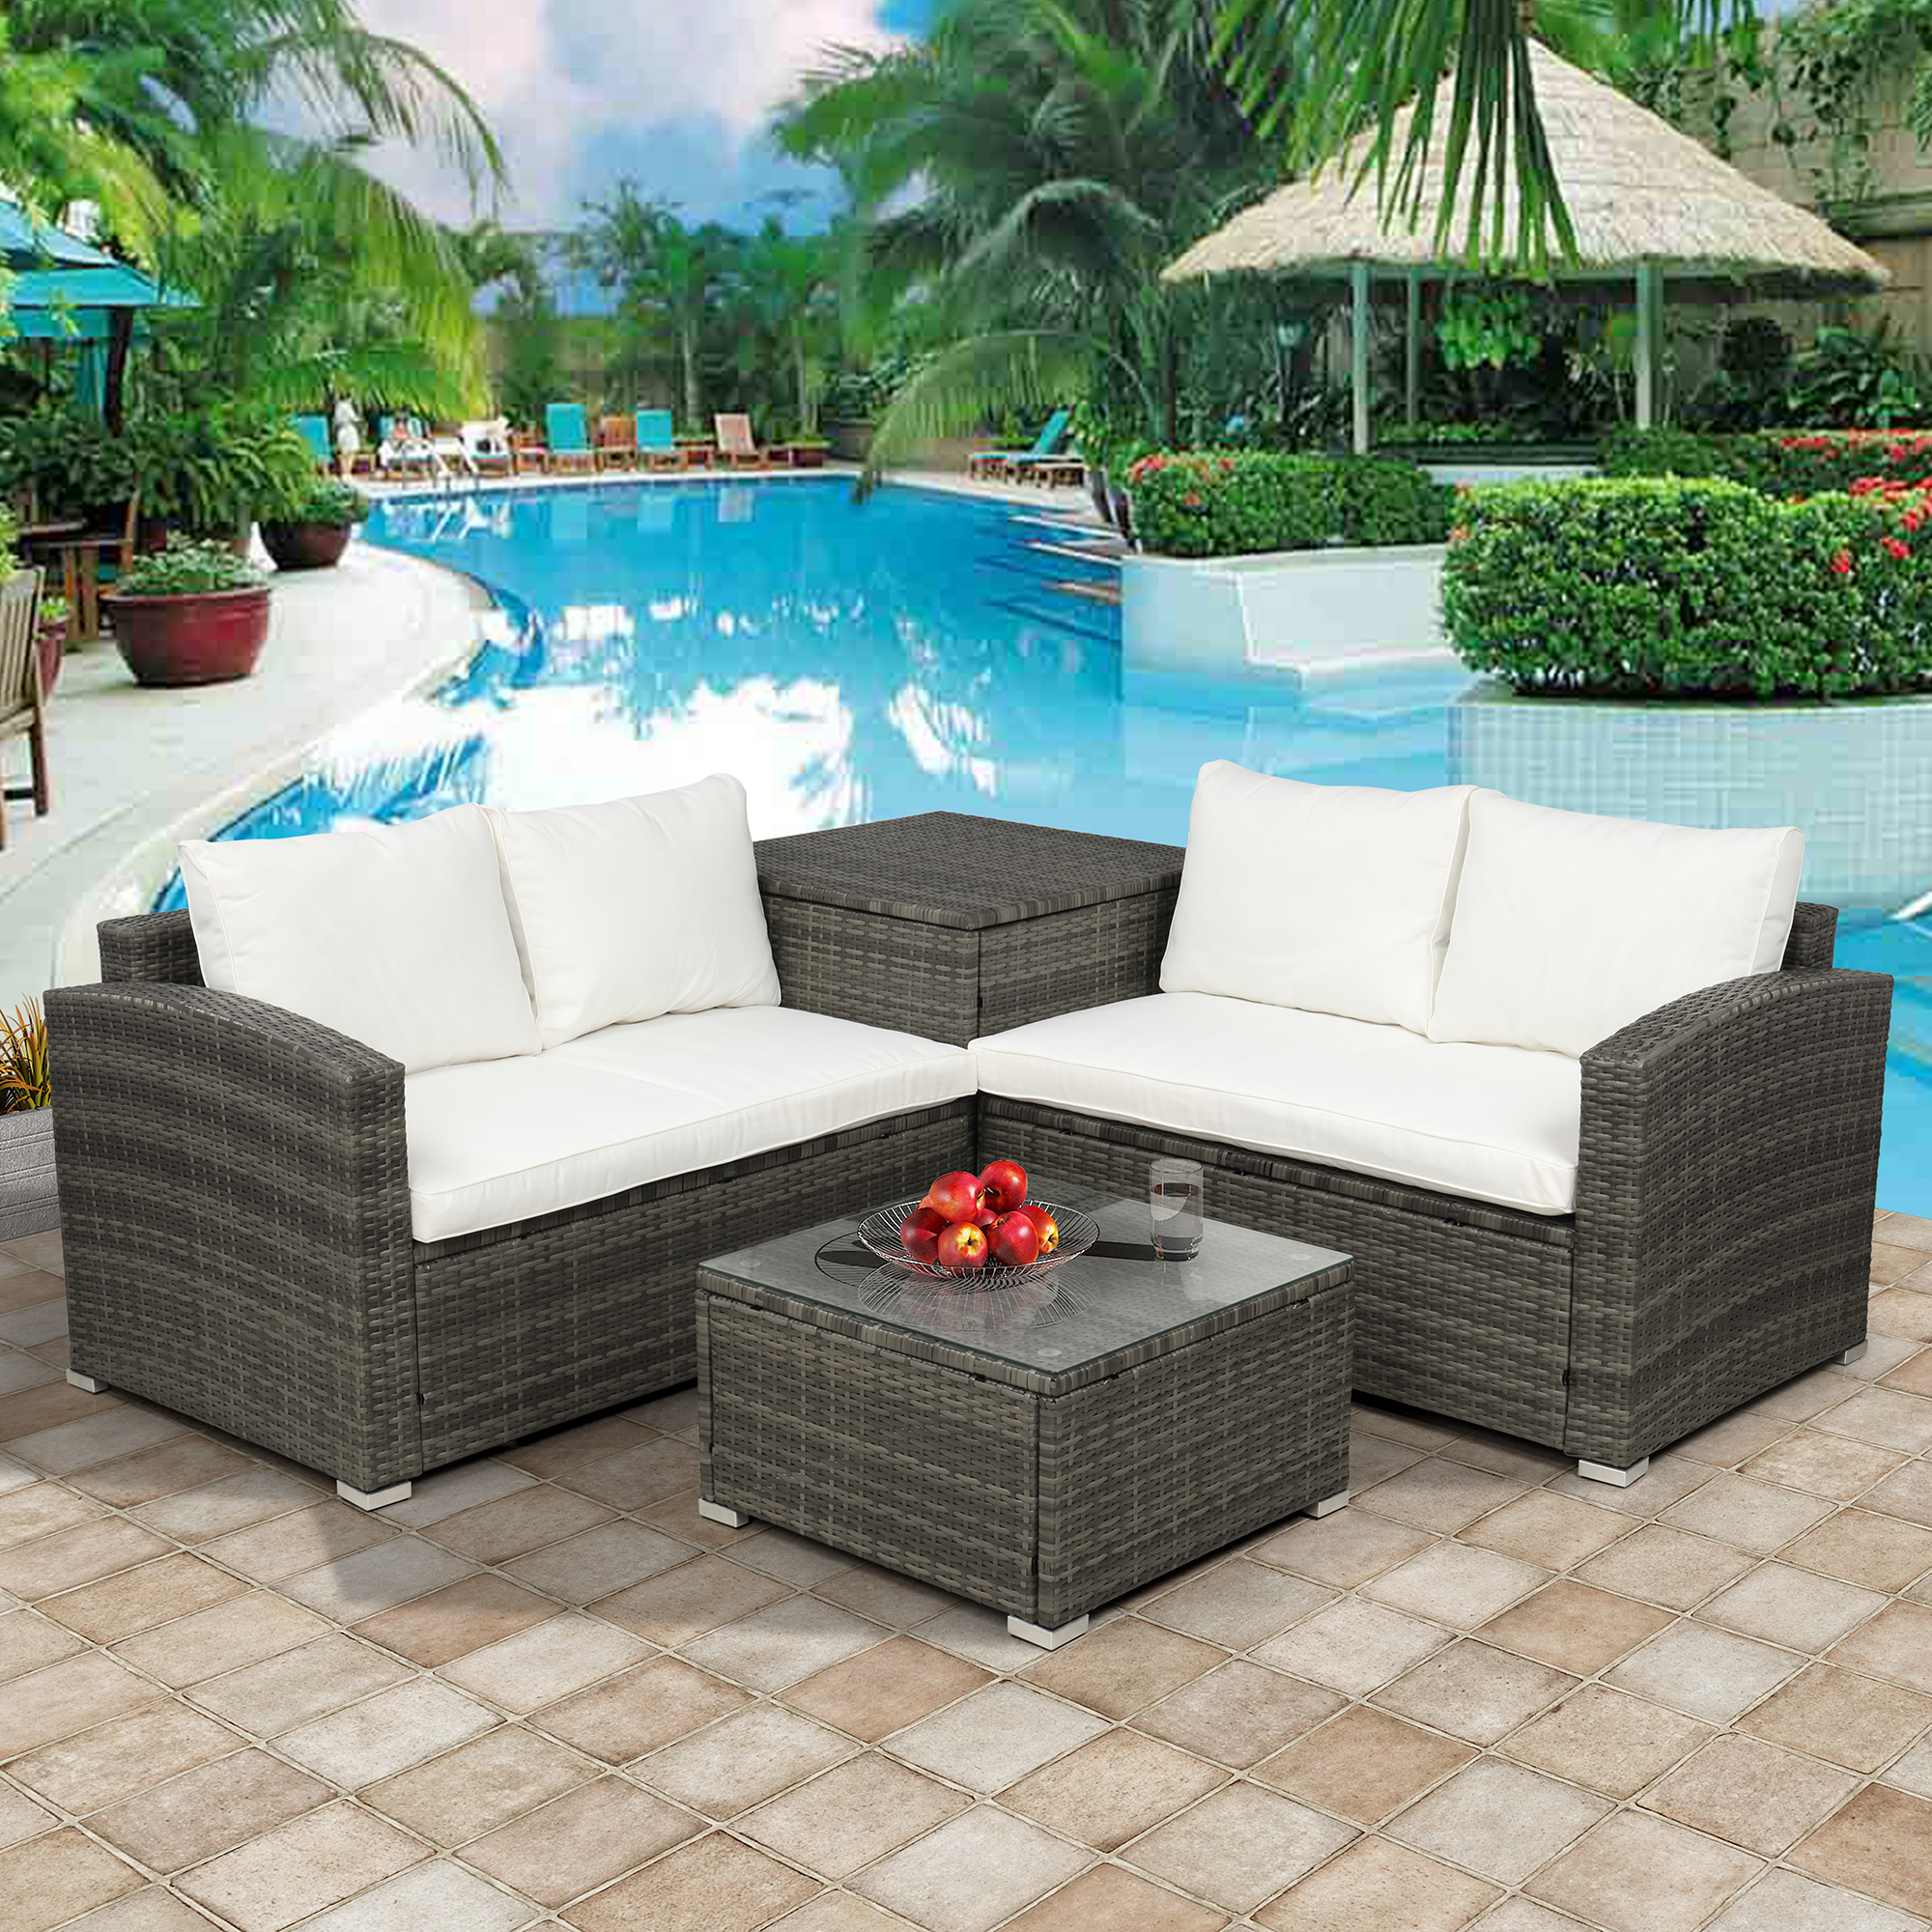 4 Pcs Patio Sectional Sofa Sets Outdoor Patio Furniture Sets Conversation Sets, Wicker Rattan Sectional Couch Sofa Set with Cushions, Pillows and Coffee Table - image 1 of 8